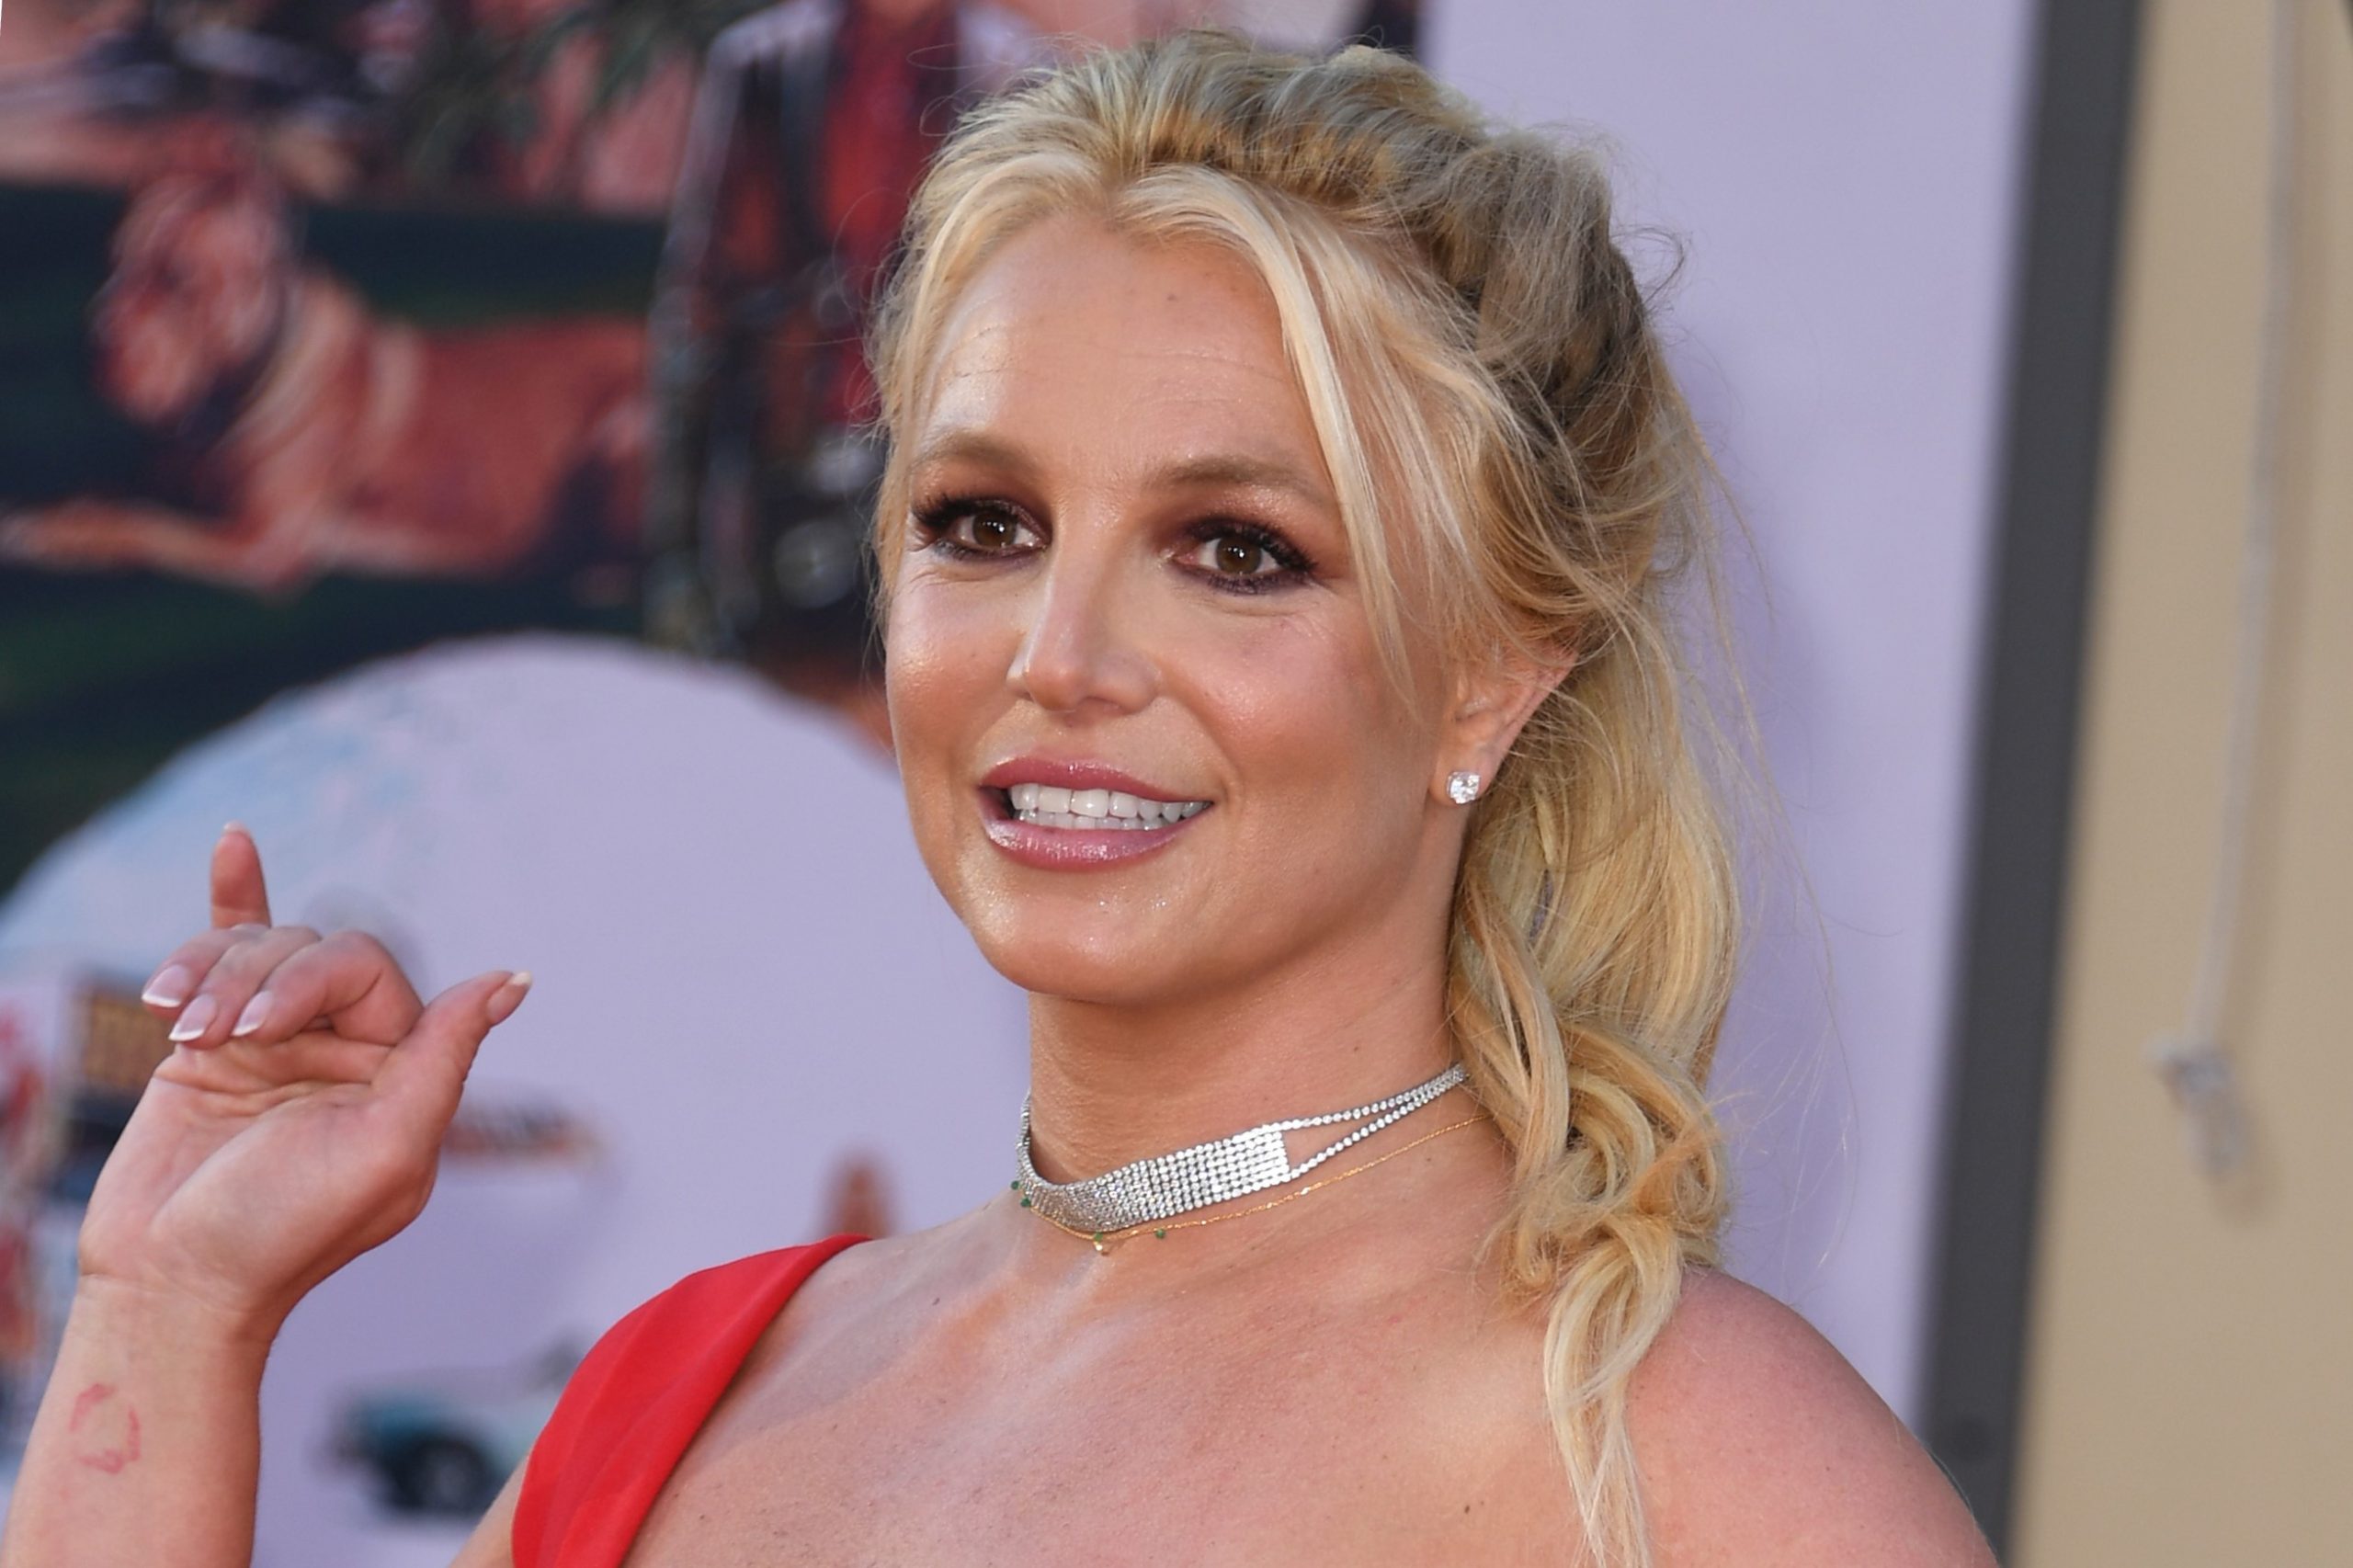 ‘Britney vs Spears’: Filmmaker Erin Lee Carr Hopes Britney Will Like the Film. But Adds She Doesn’t “Know What It’s Like to Be Her”